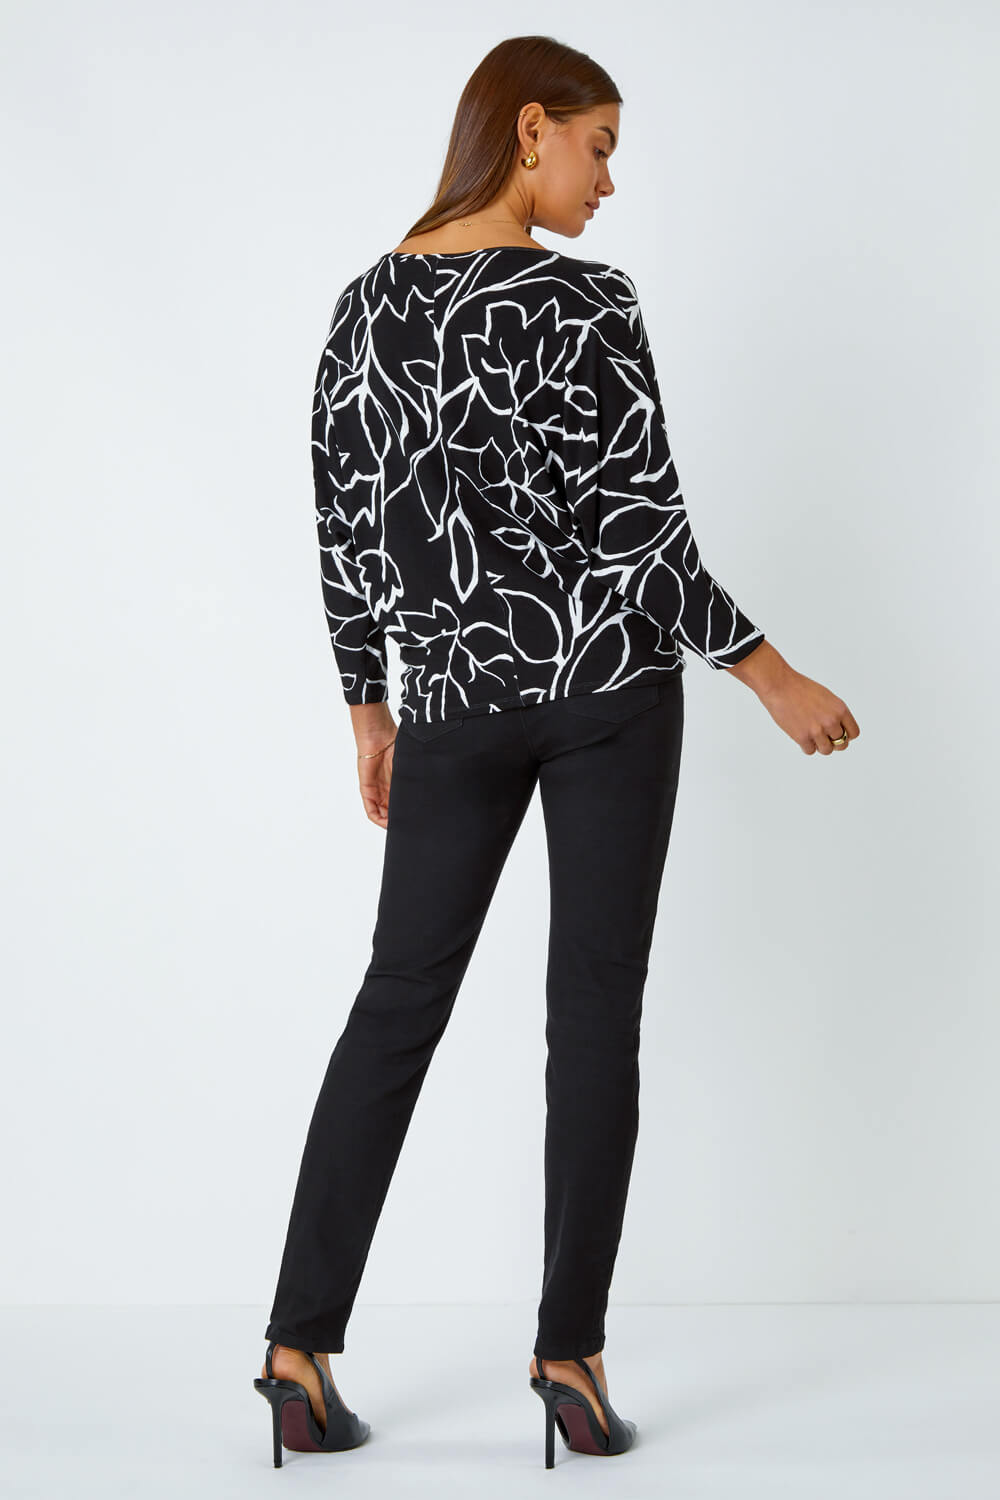 Black Contrast Floral Linear Print Stretch Top, Image 3 of 5